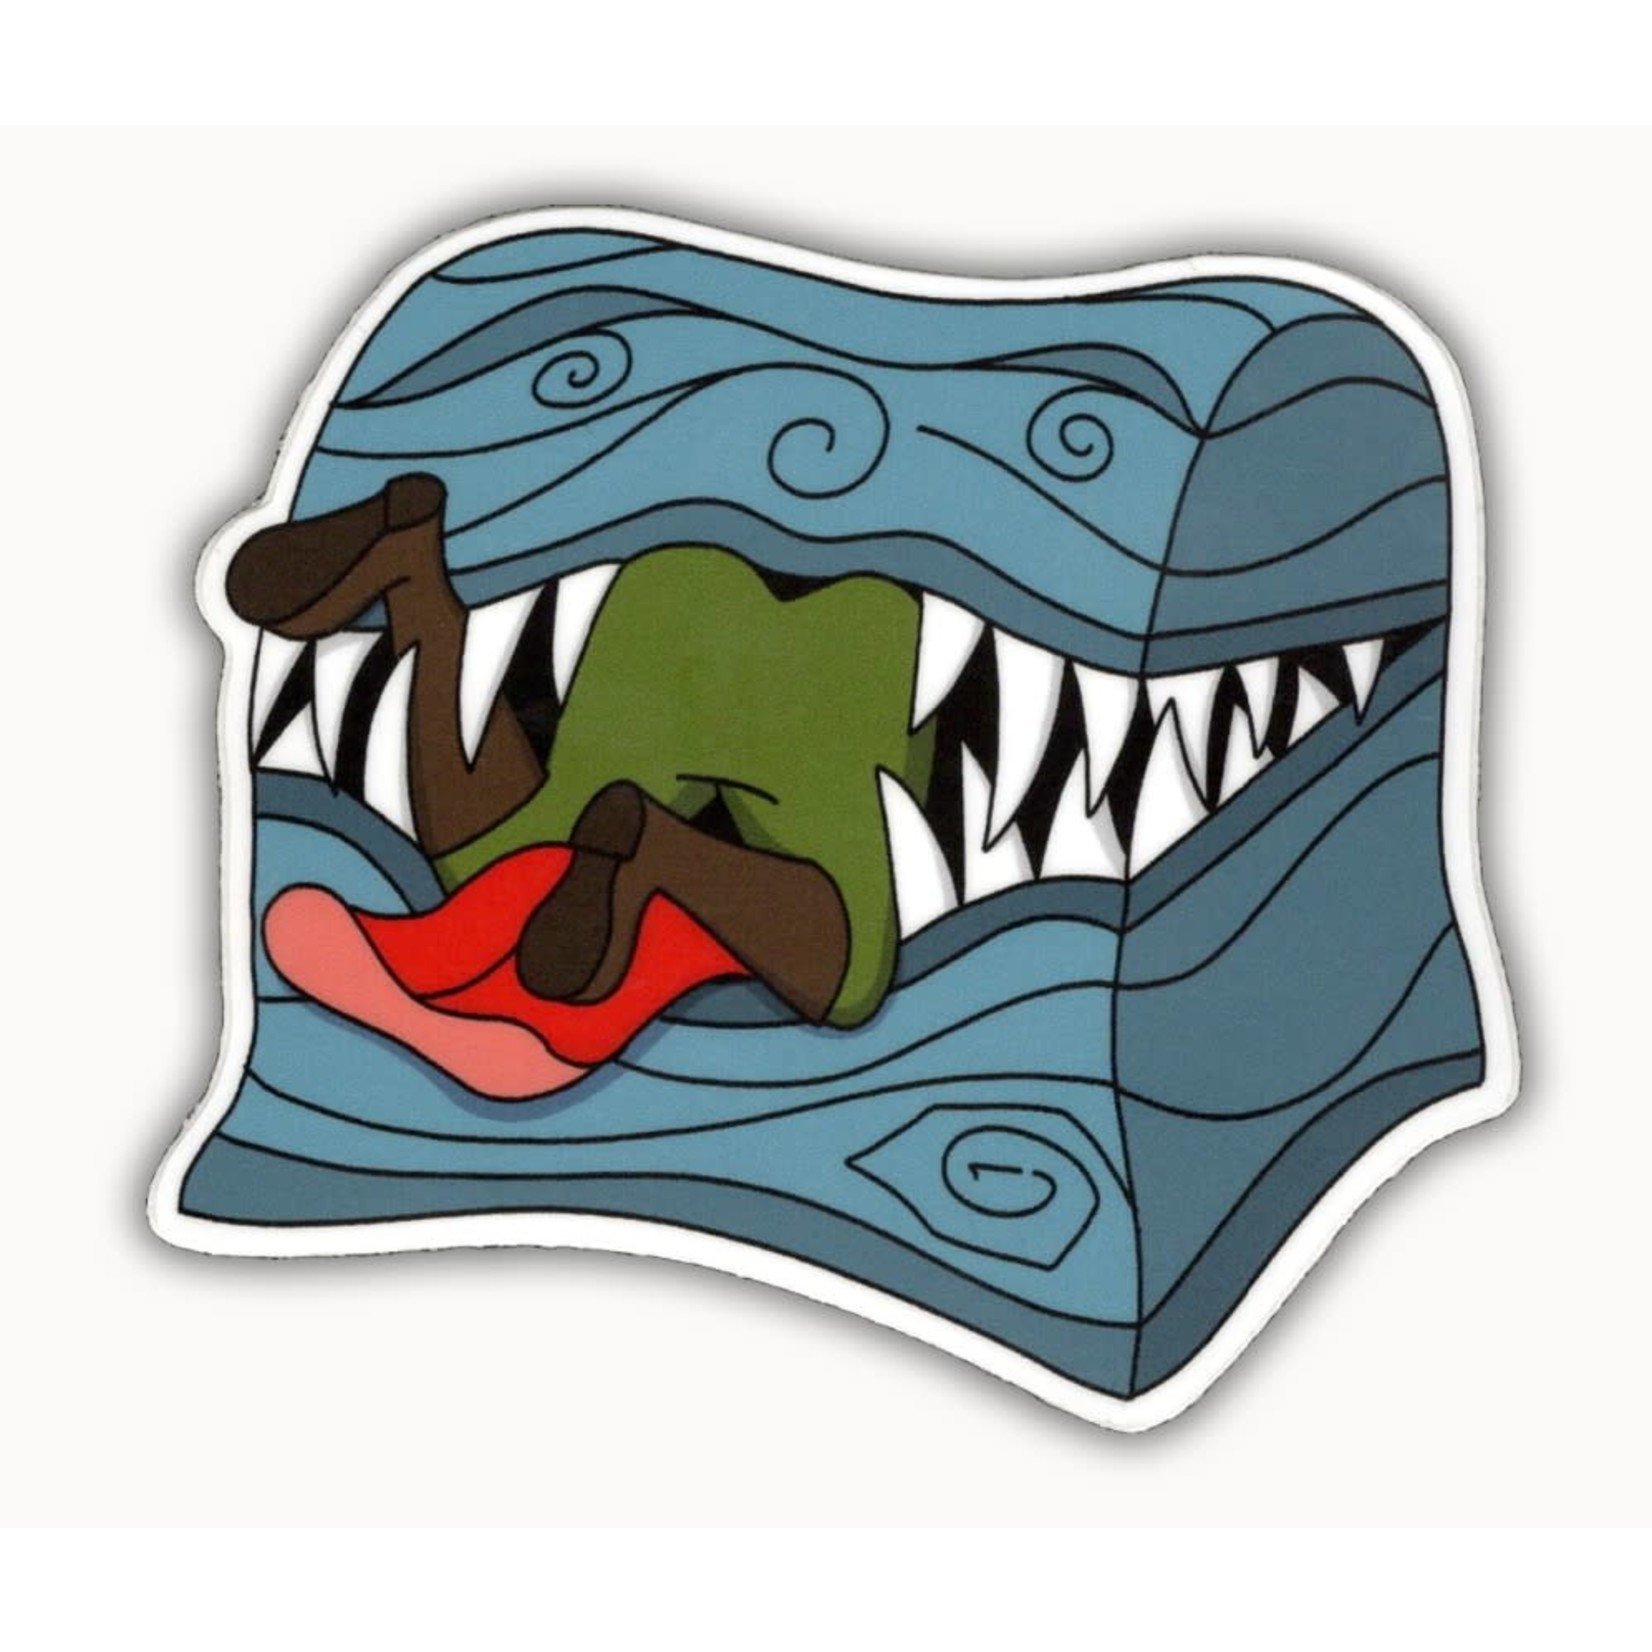 Storymakers Trading Co Vinyl Sticker: Mimic (Dumb Ways to Die)